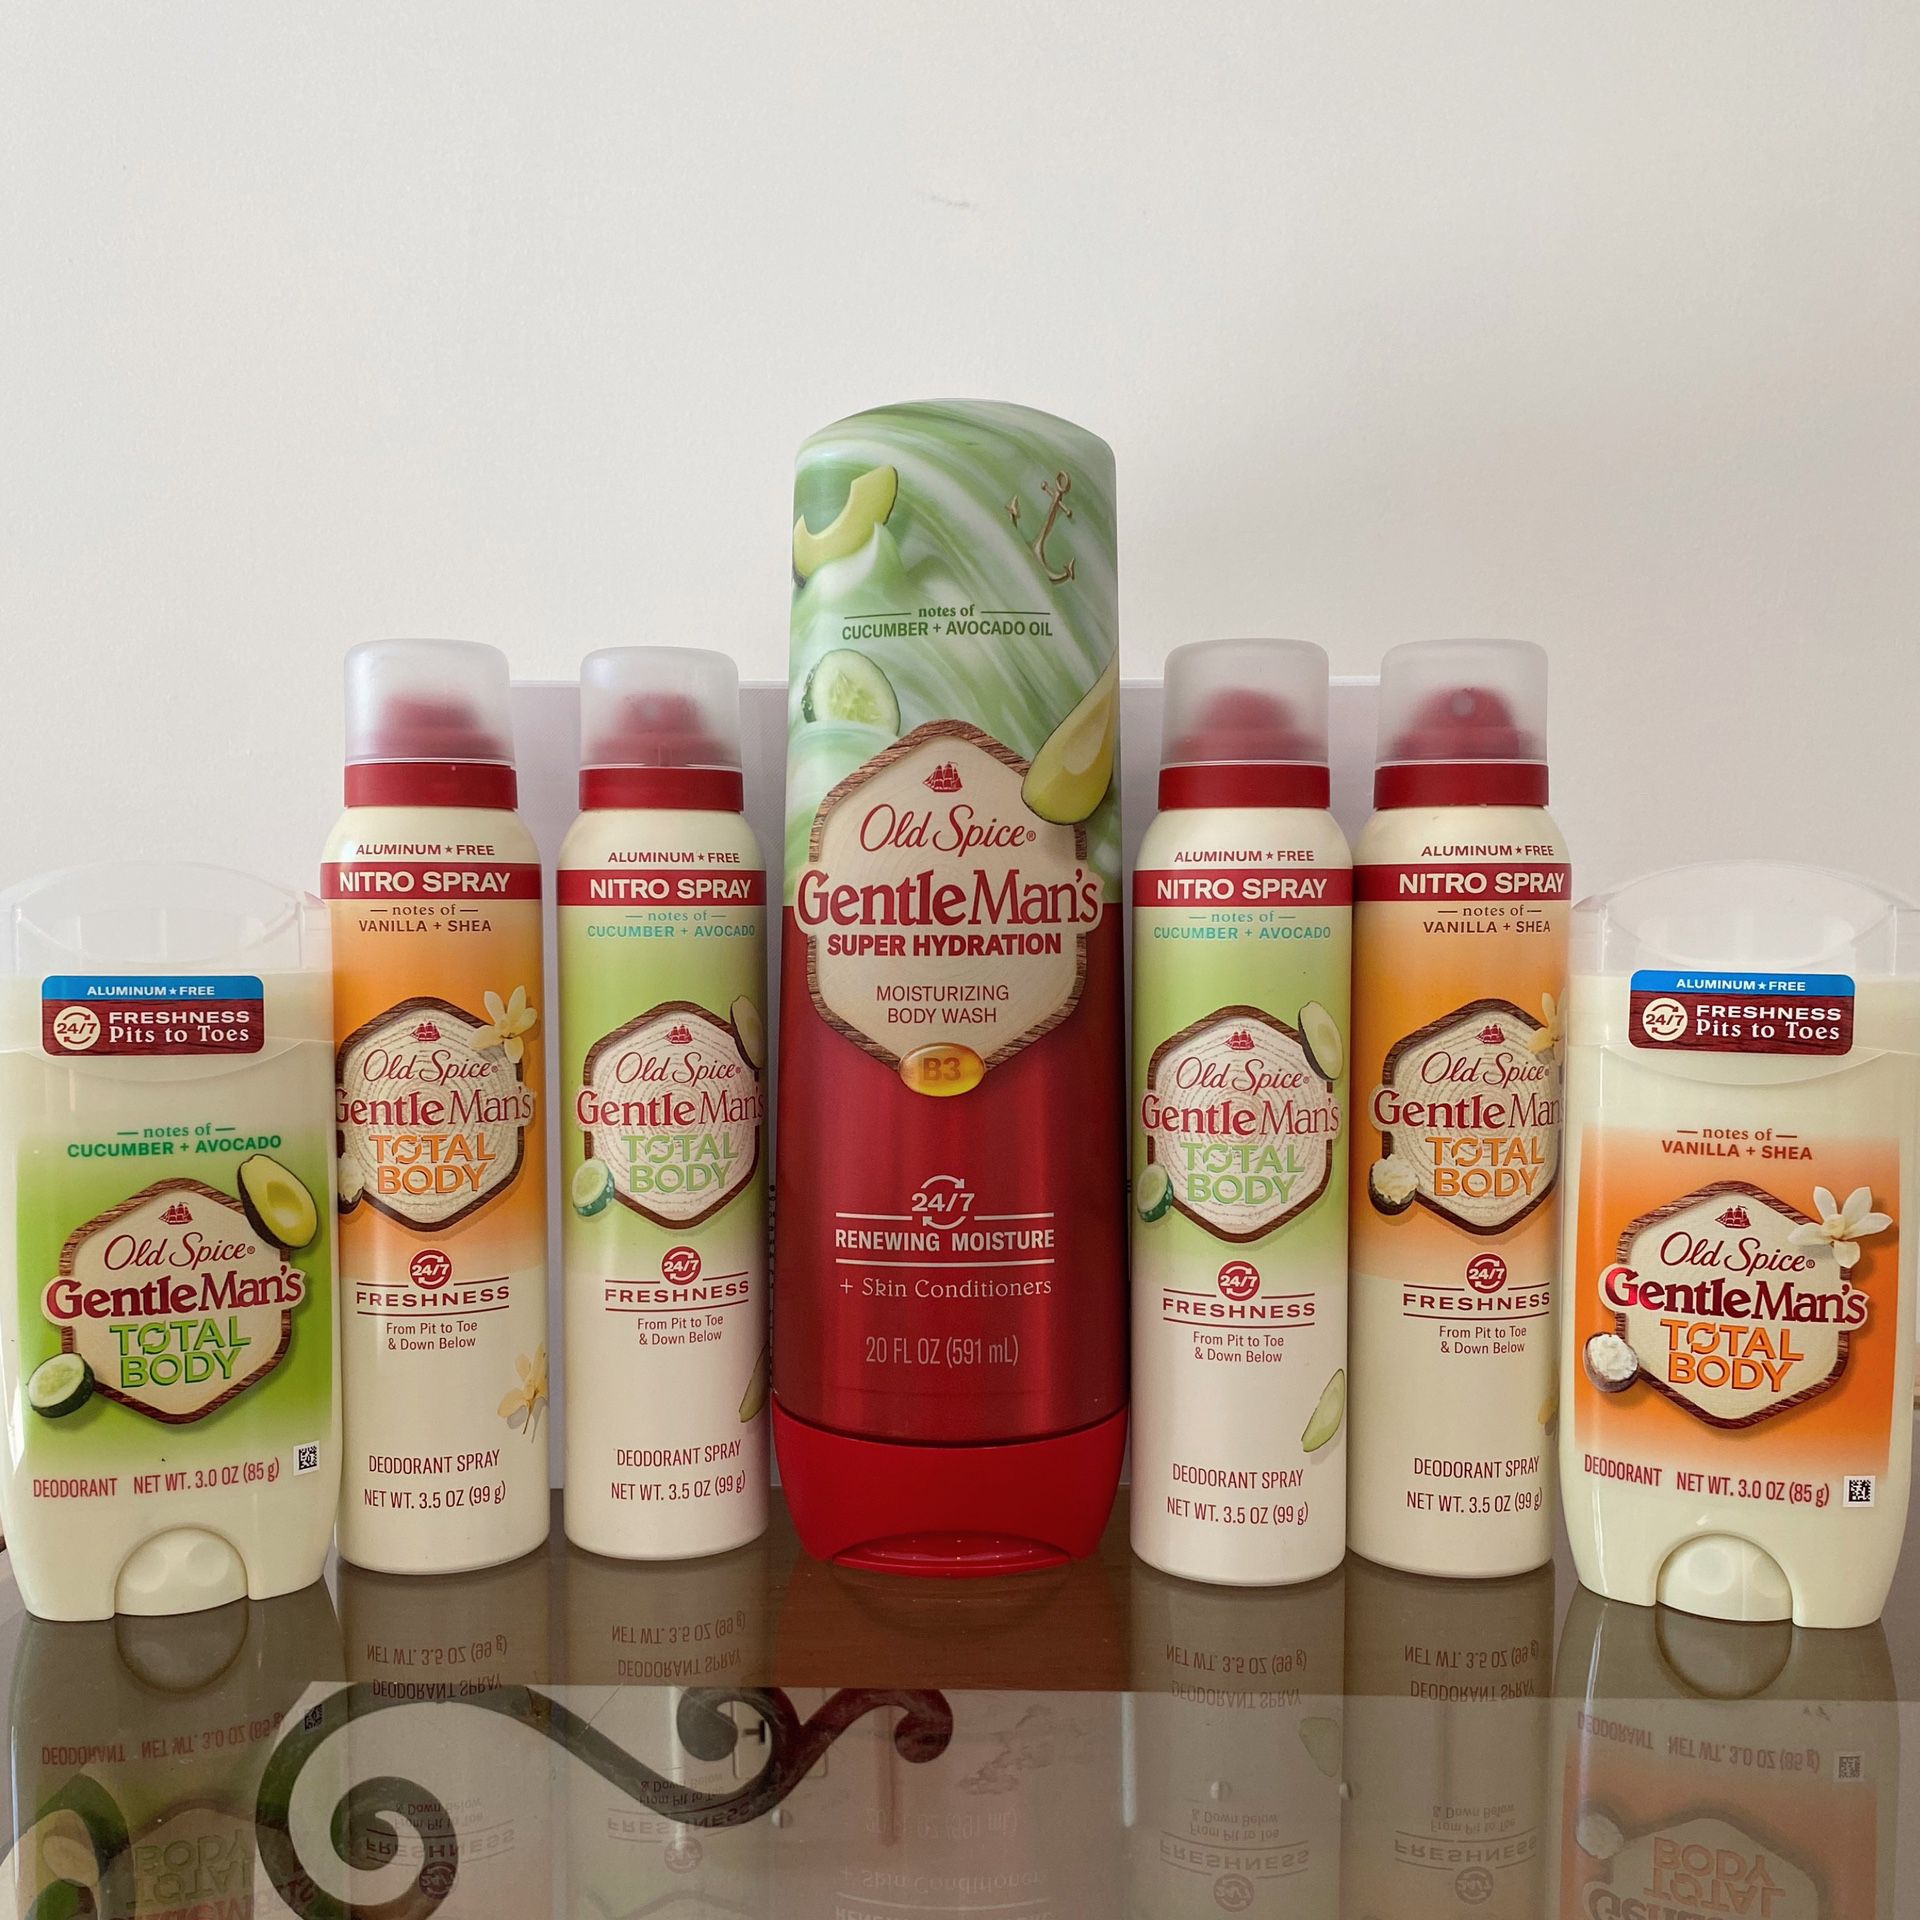 Brand New Old Spice Men’s Deodorant & Body Wash Personal Care Bundle- $5 Each Item Or All For $30